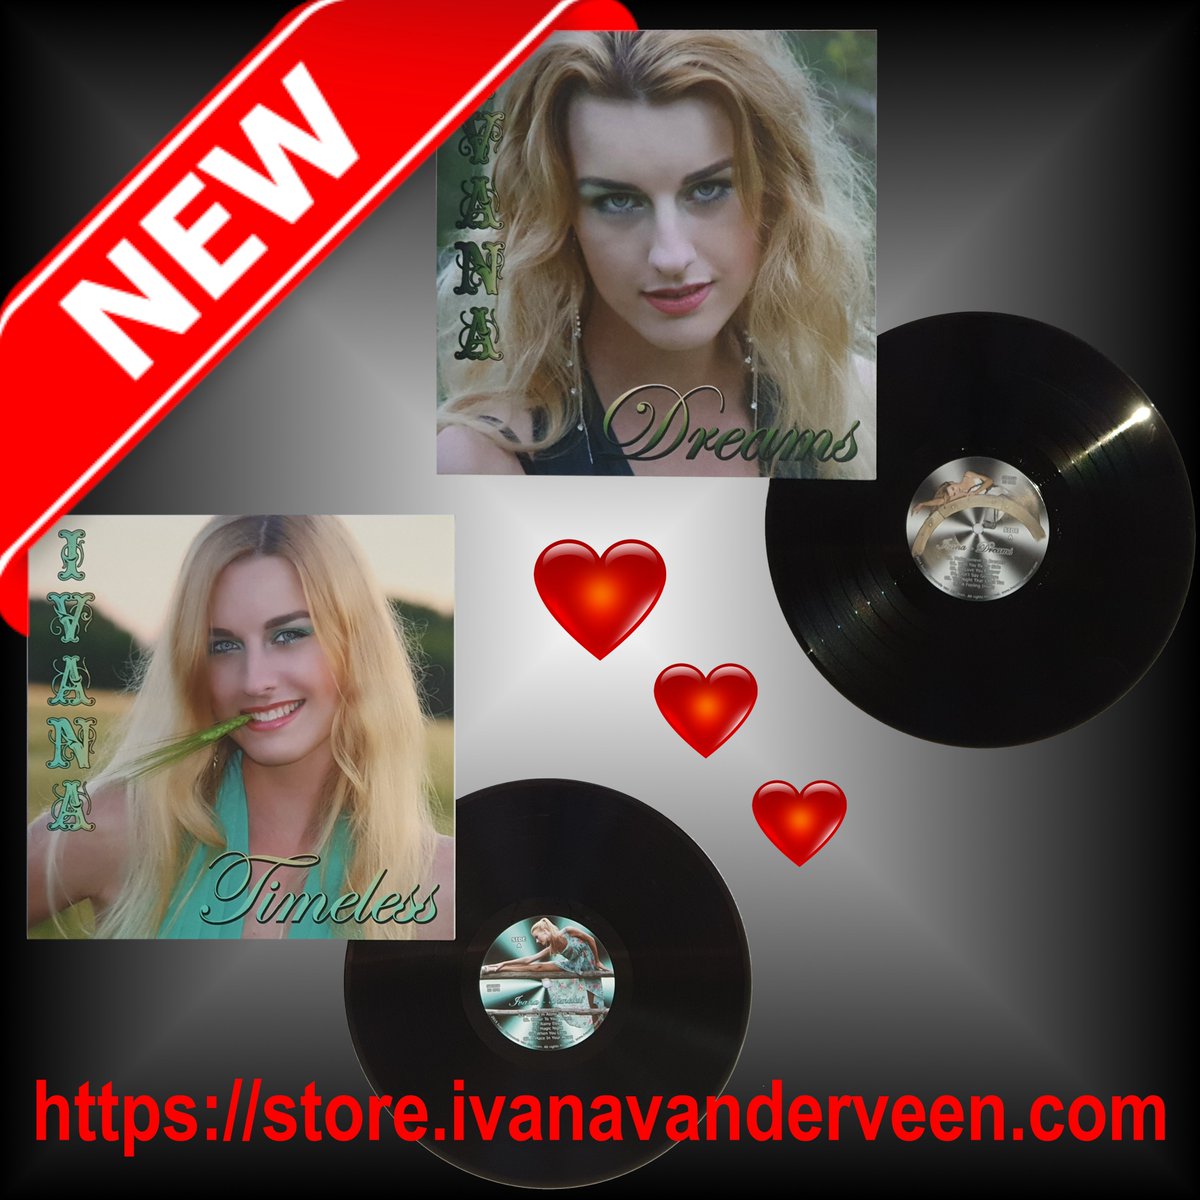 😍❤️‍🔥😍The day has come!!!! ;) ♥ My very first 2 albums are NOW available on LP!!! @ store.ivanavanderveen.com/product-catego… ♥ Get your copy today and I will sign them personally to you ;) ♥ Your support means the world!!! Much Love ♥♥♥ Ivana